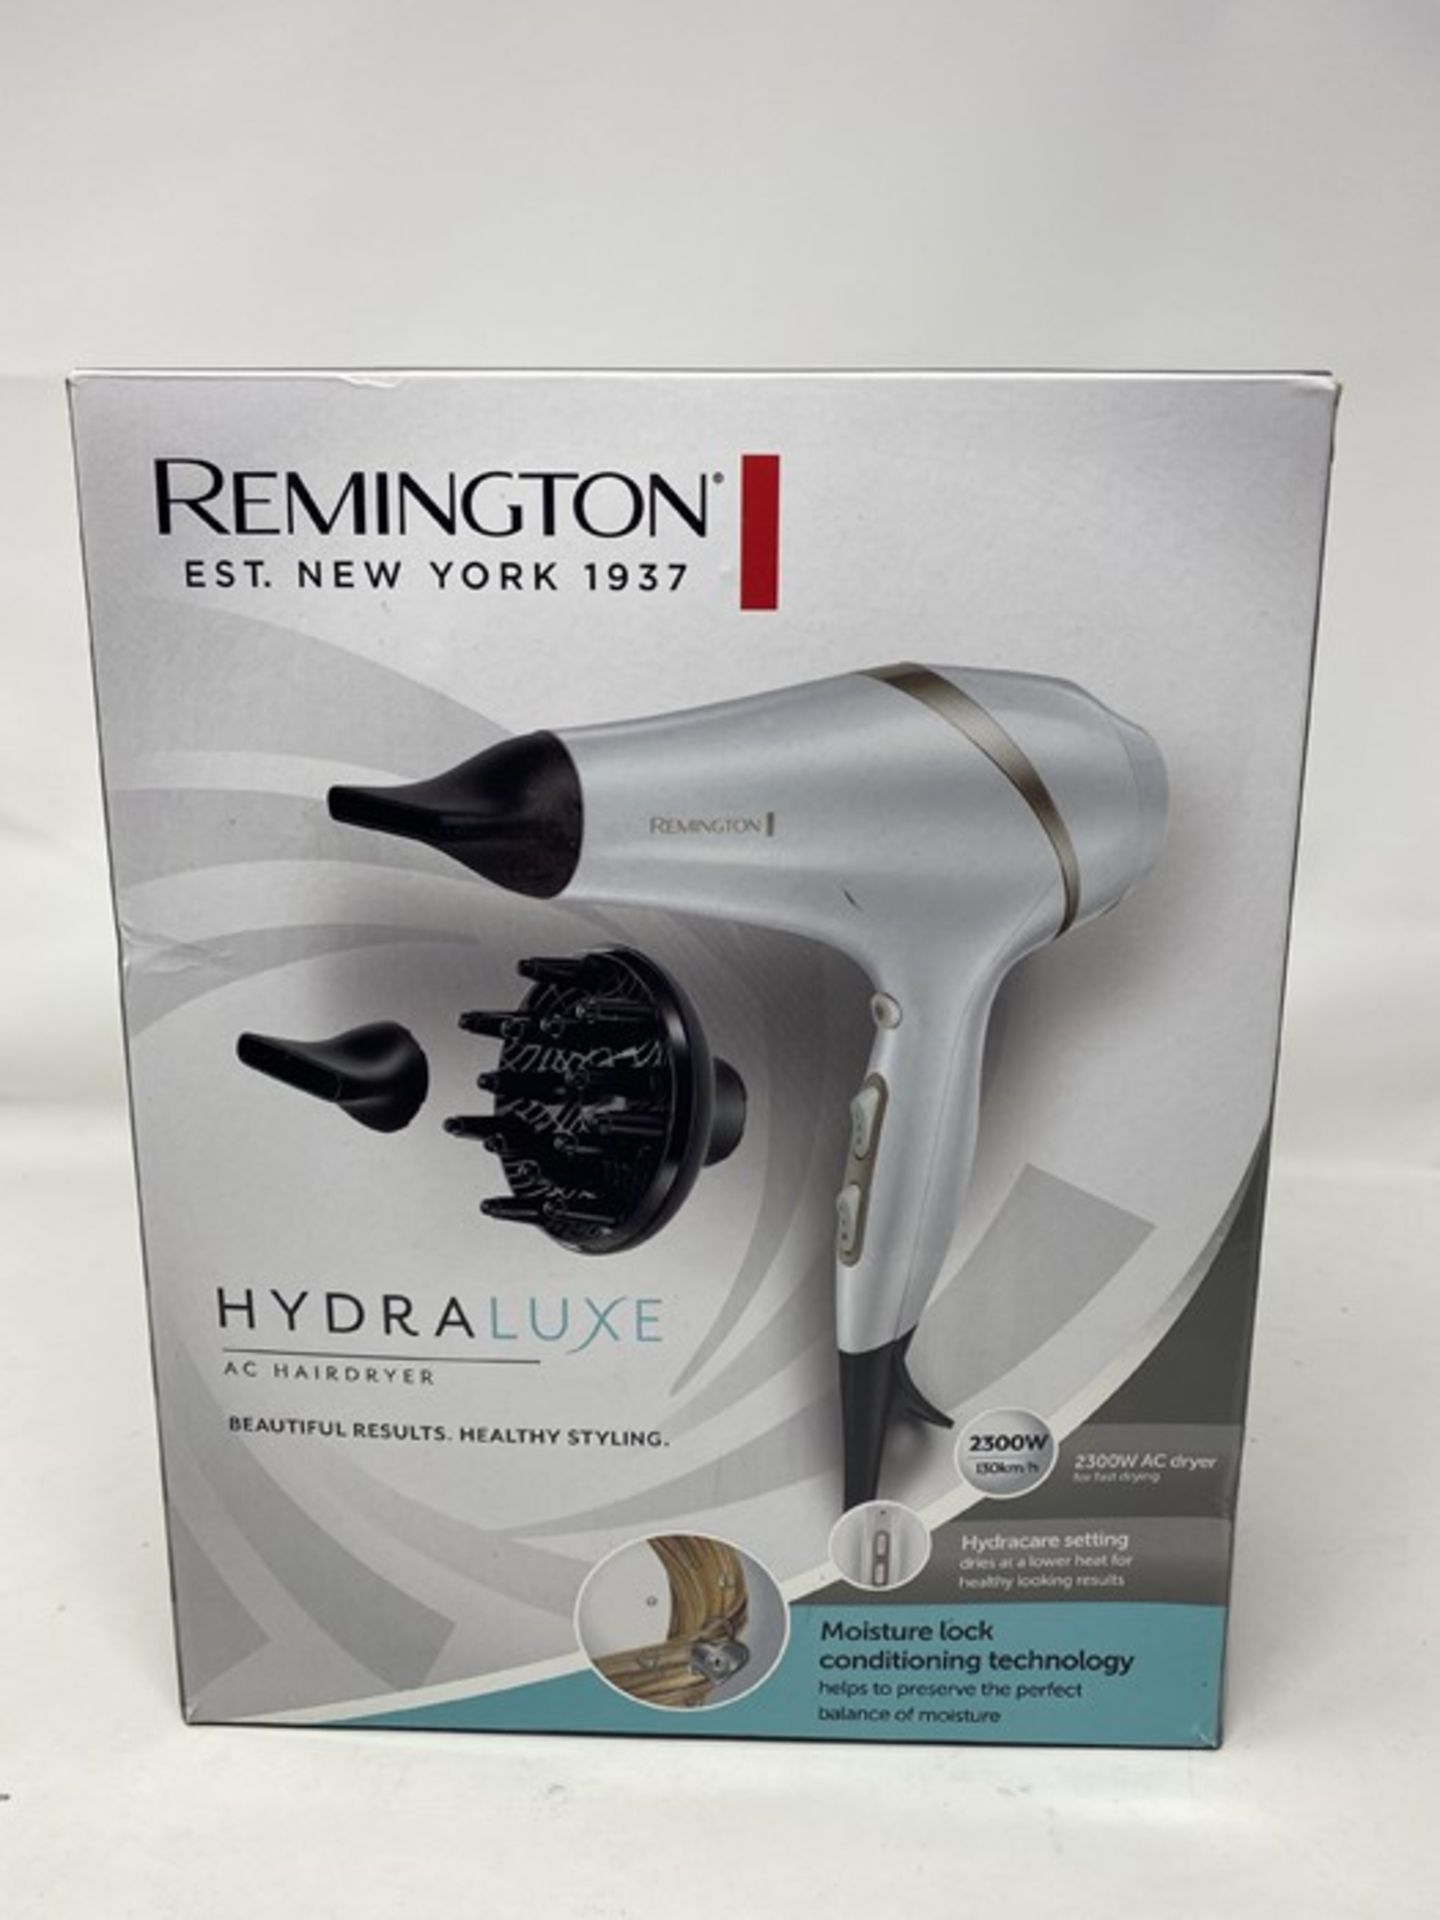 Remington Hydraluxe Hair Dryer with Moisture Loc - Image 2 of 2